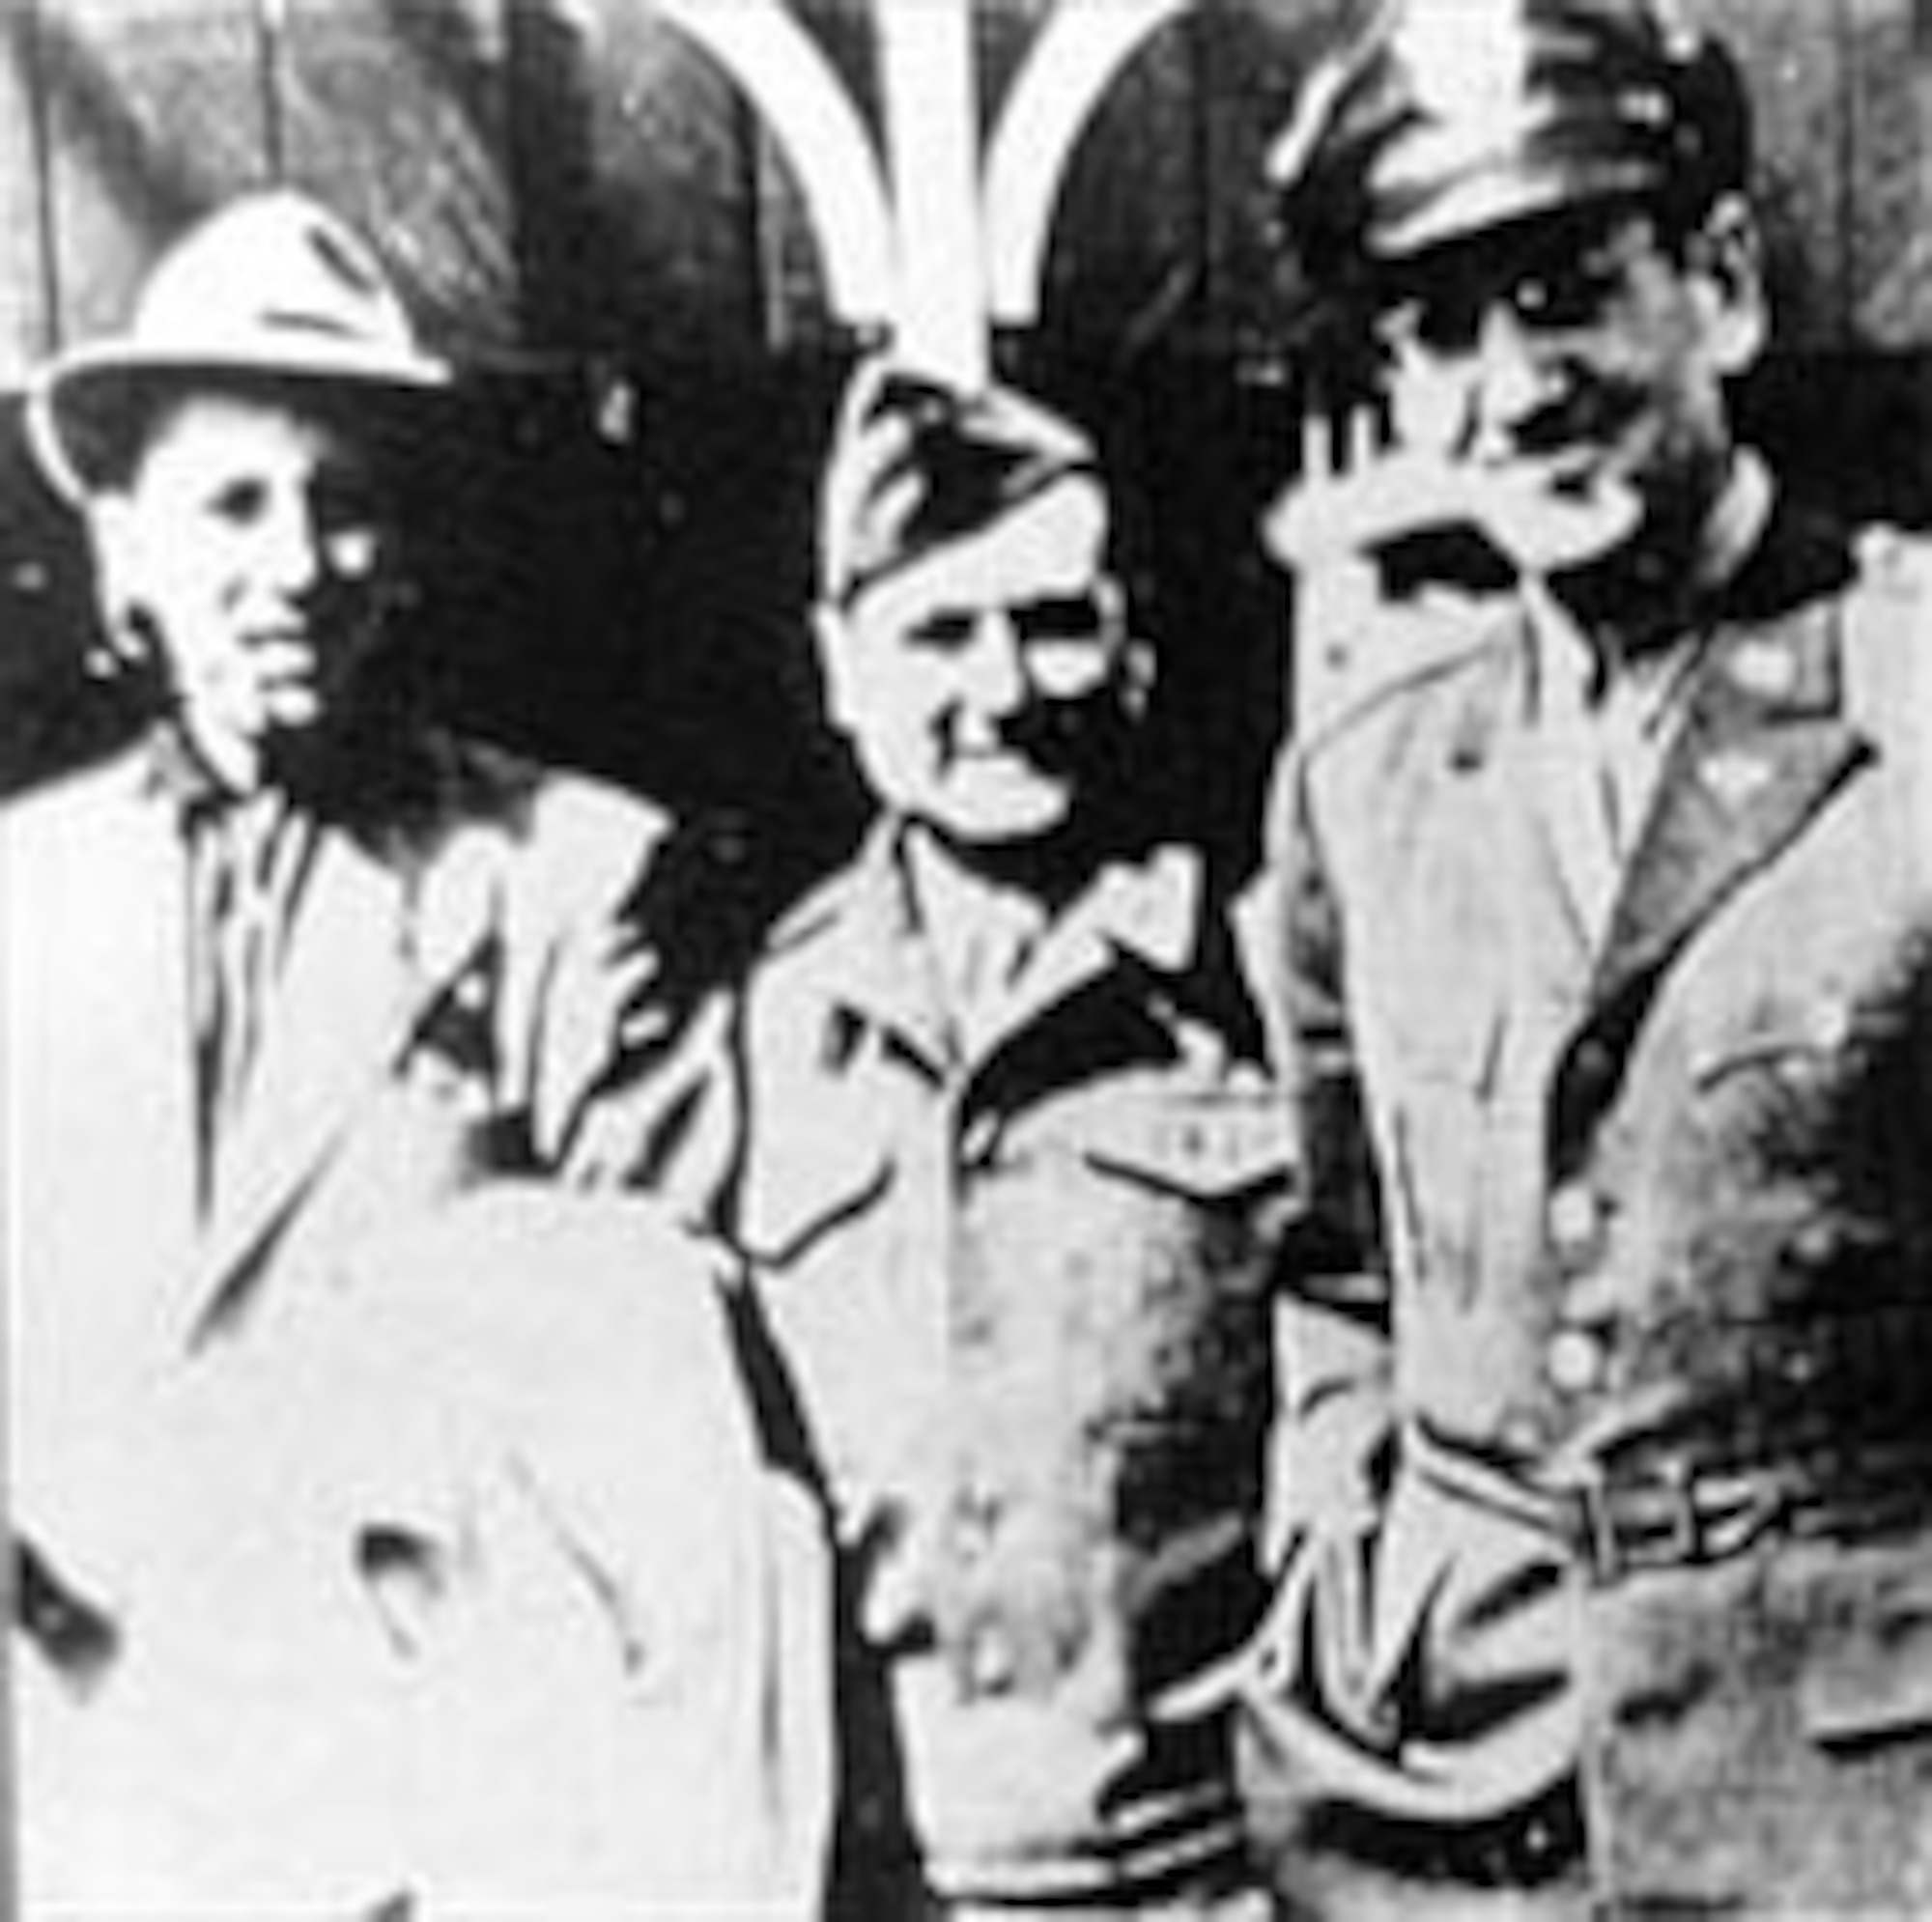 Bing Crosby (left) made several broadcasts with the Army Air Force Band in August 1944. (U.S. Air Force photo)